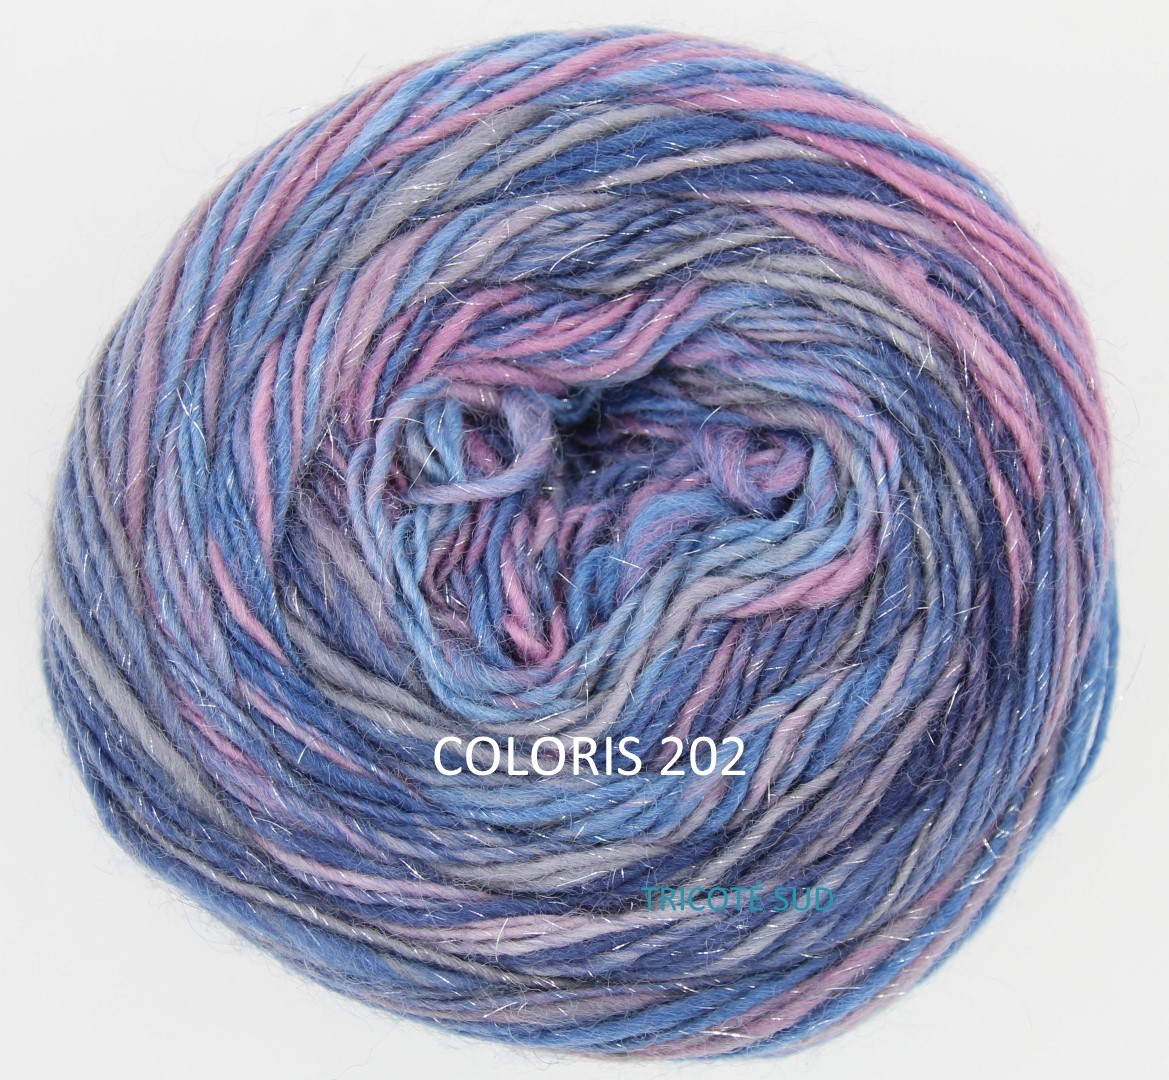 MILLE COLORI SOCKS AND LACE LUXE LANG YARNS COLORIS 202 (2) (Large)